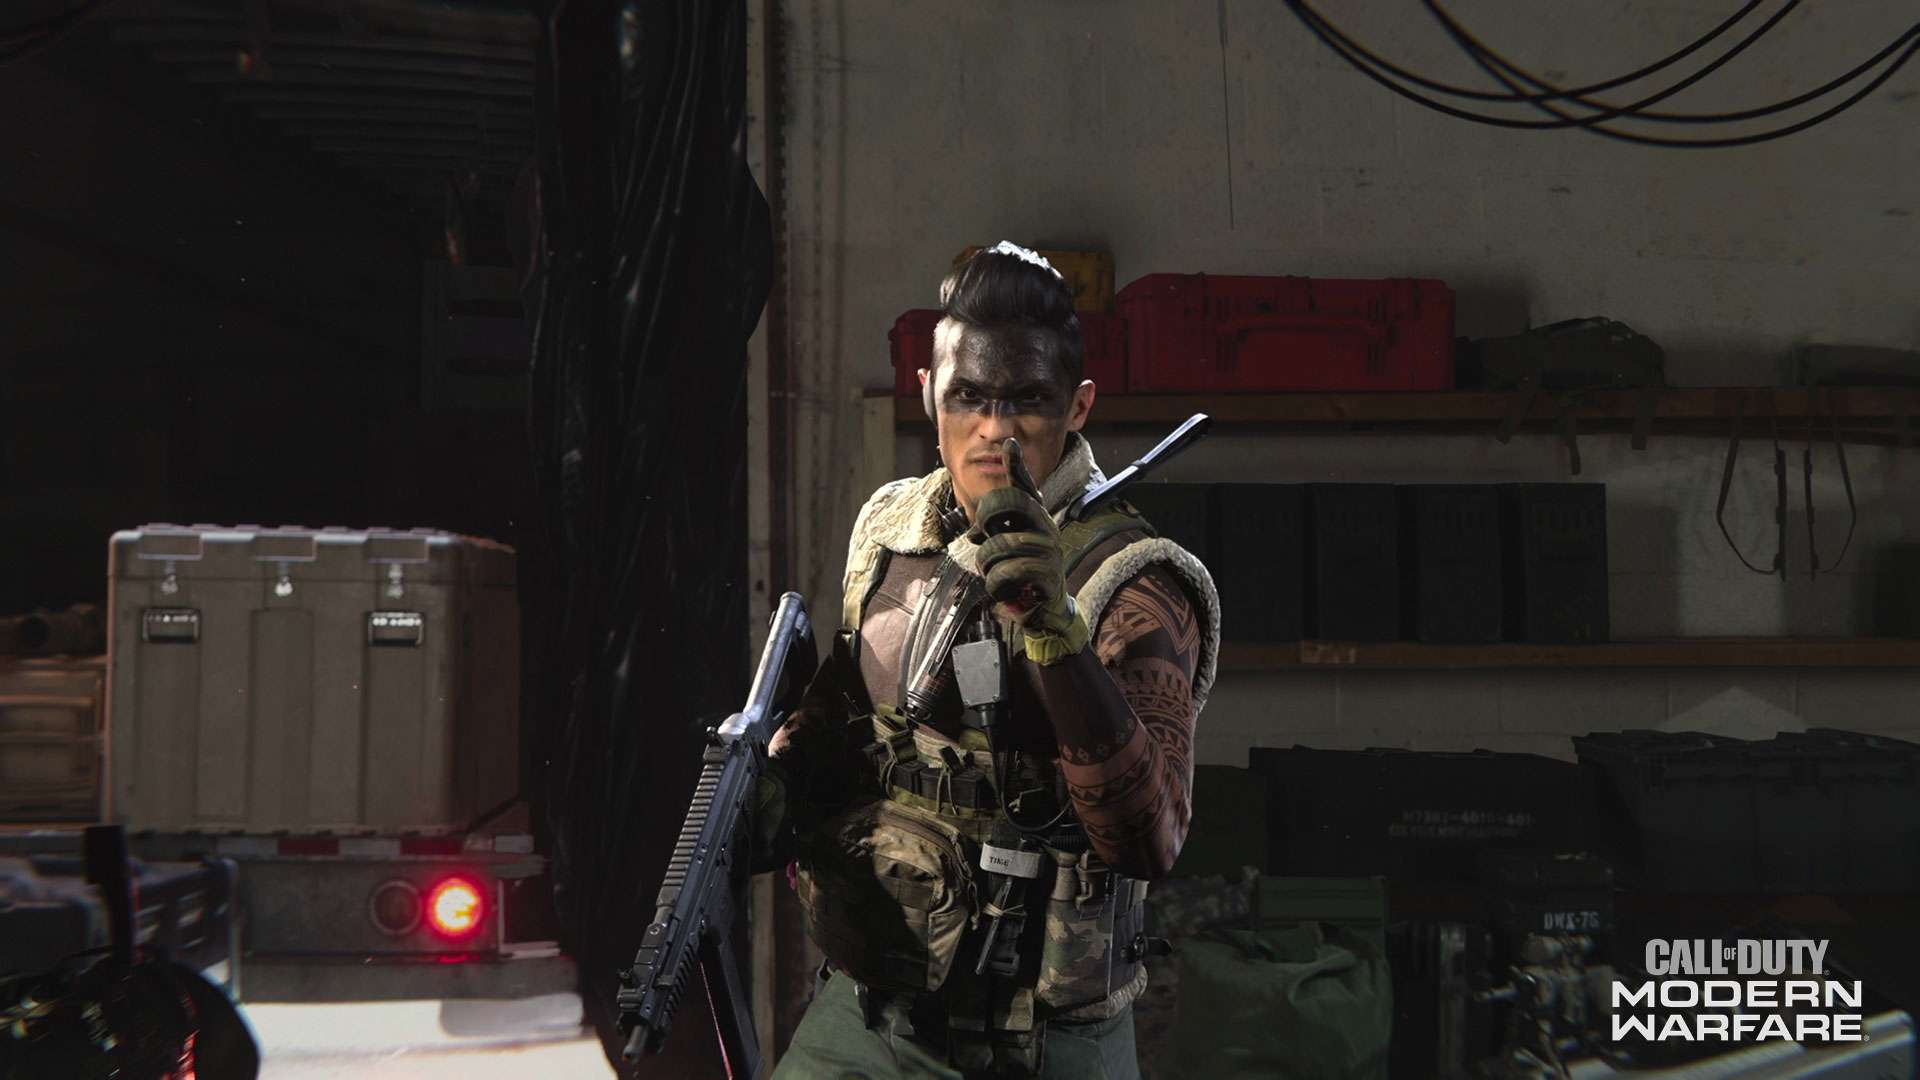 Introducing Talon – and Indiana – to the Coalition Operators of Call of Duty: Modern Warfare - Image 1